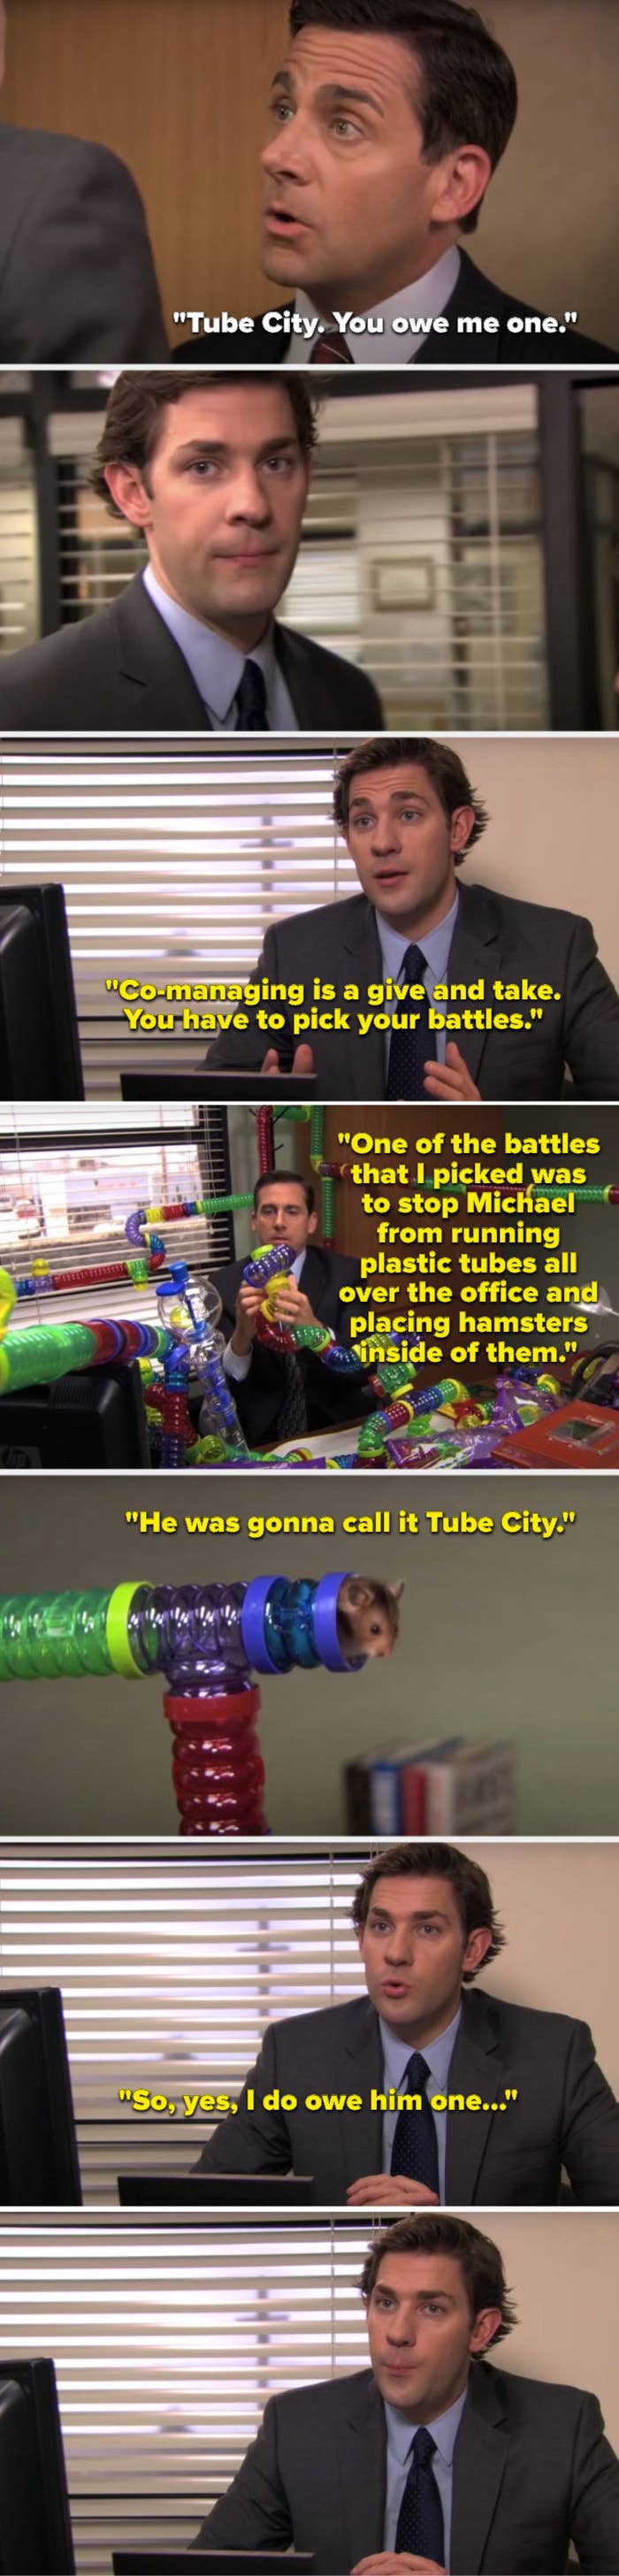 Jim saying that co-managing is a give and take and he stopped Michael from creating Tube City, and then a shot of a little tube with a hamster coming out